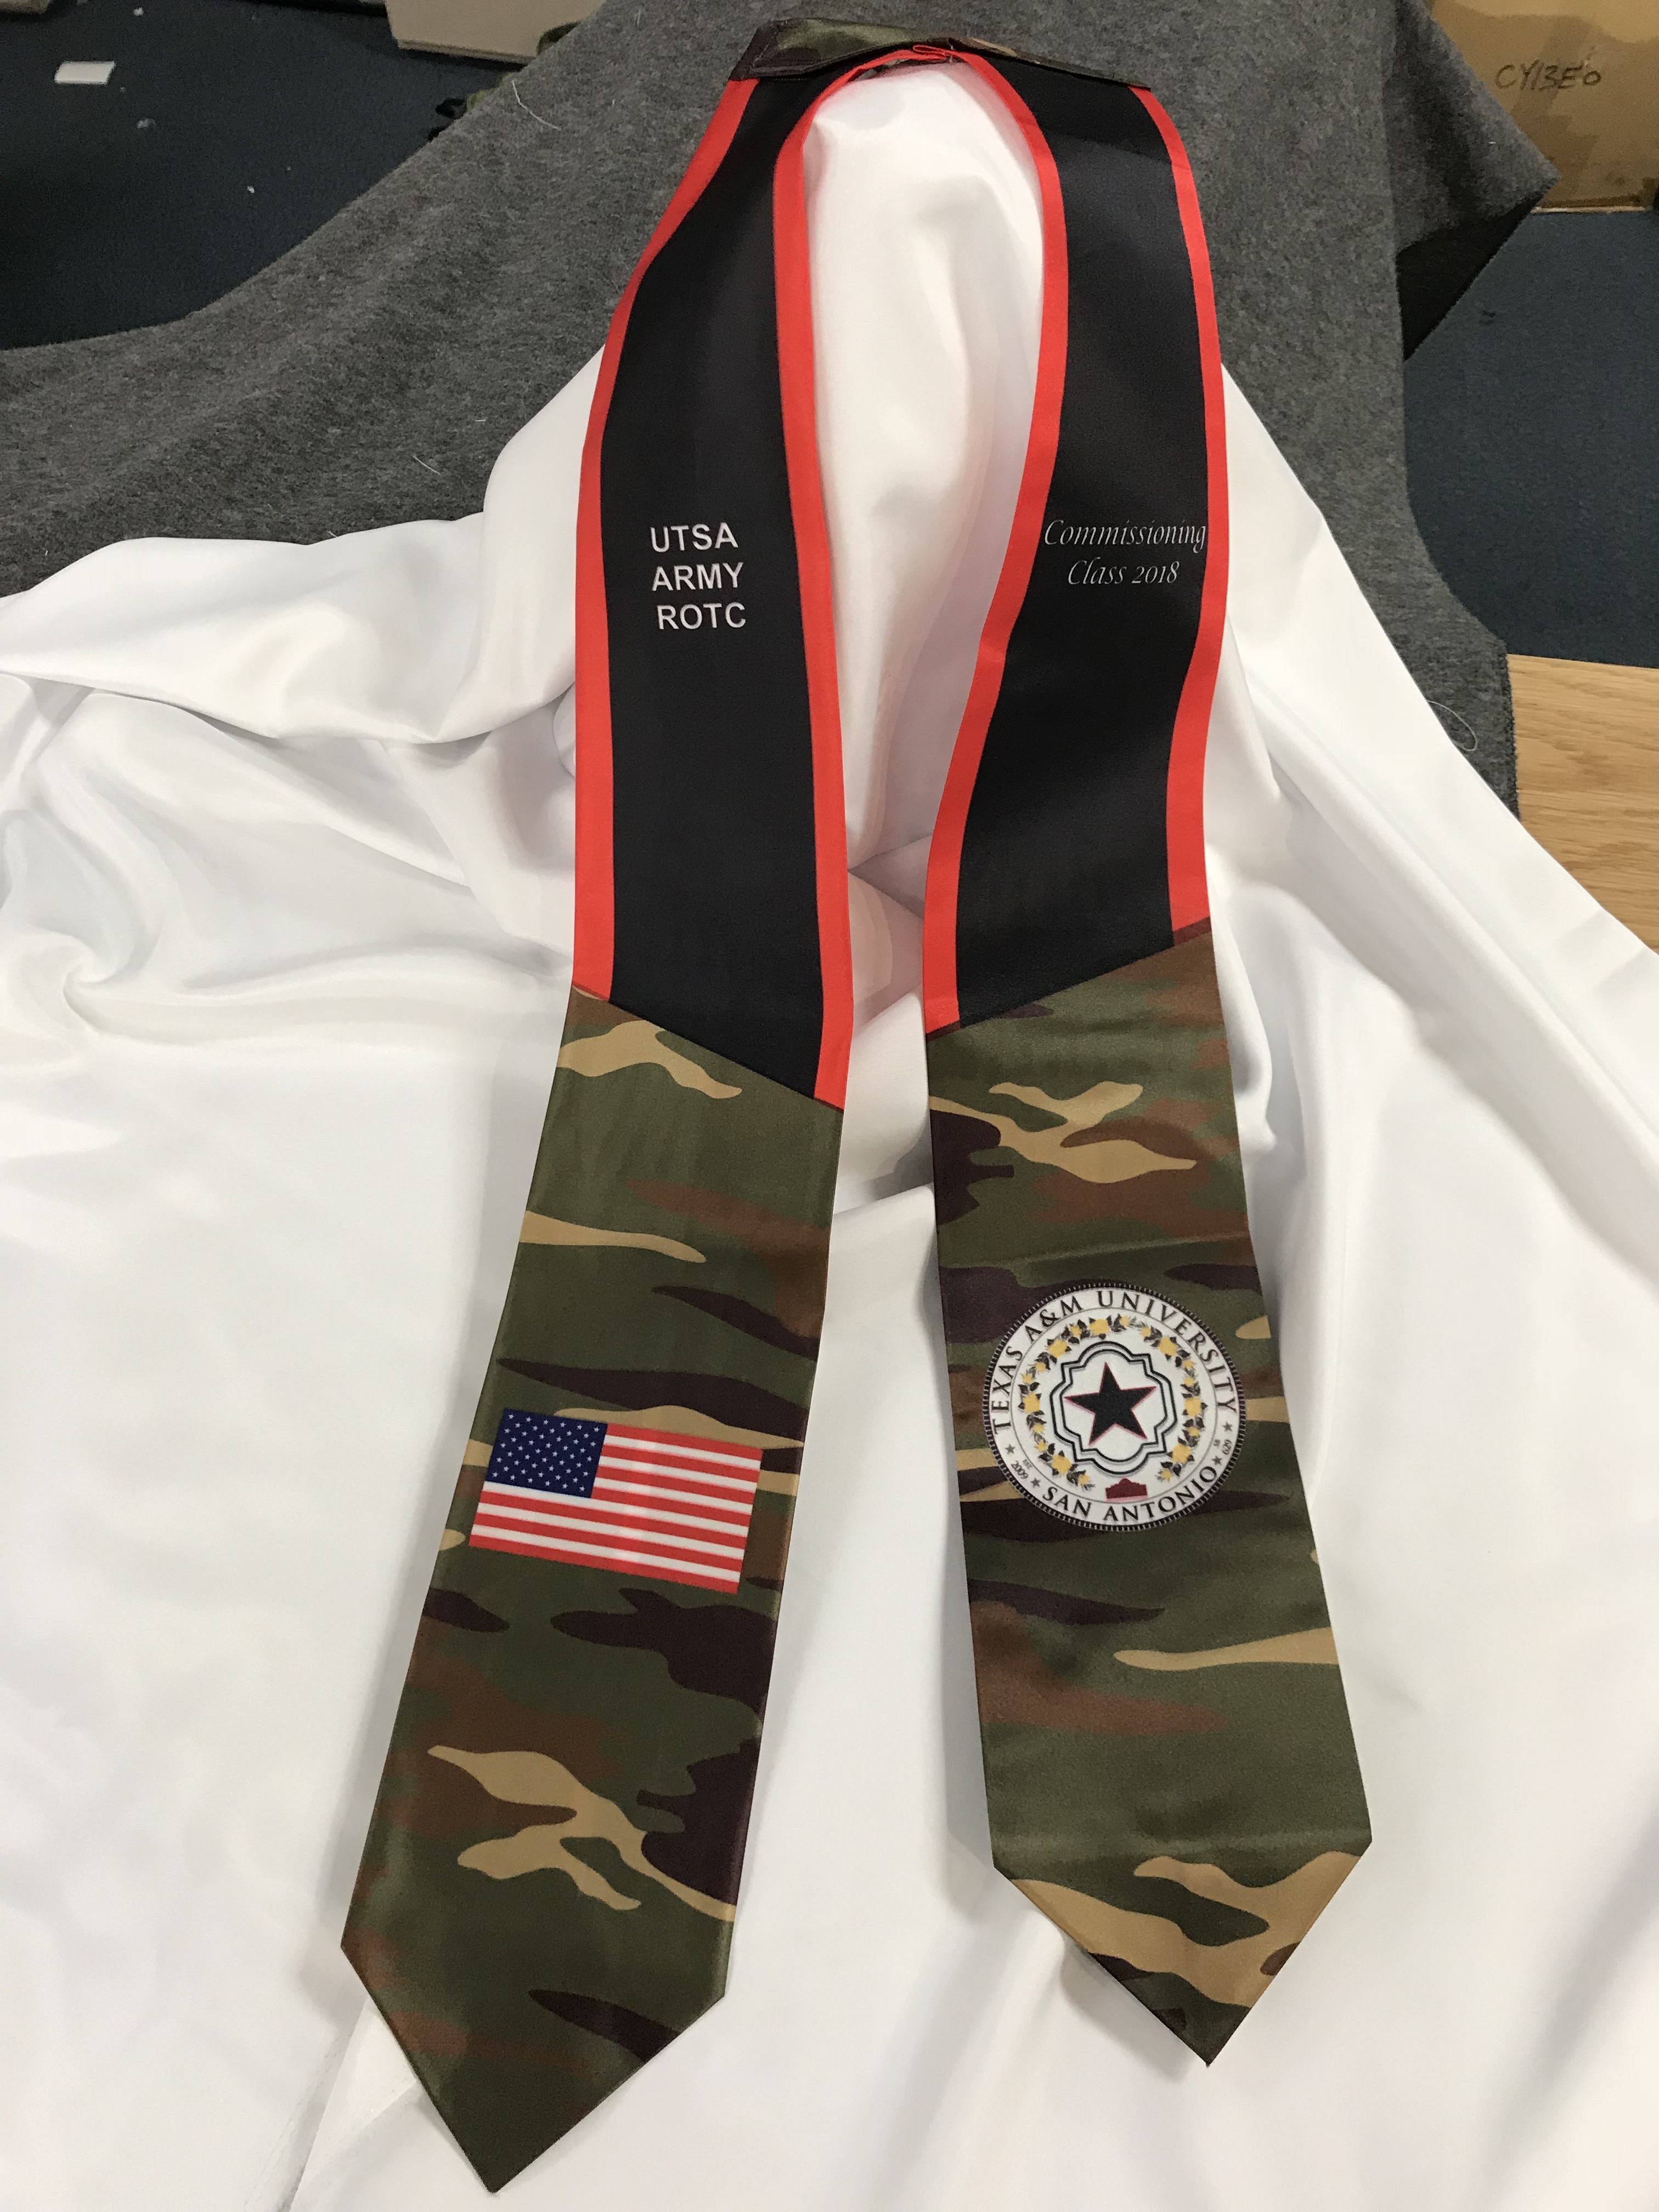 Graduation Stoles made with sublimation printing